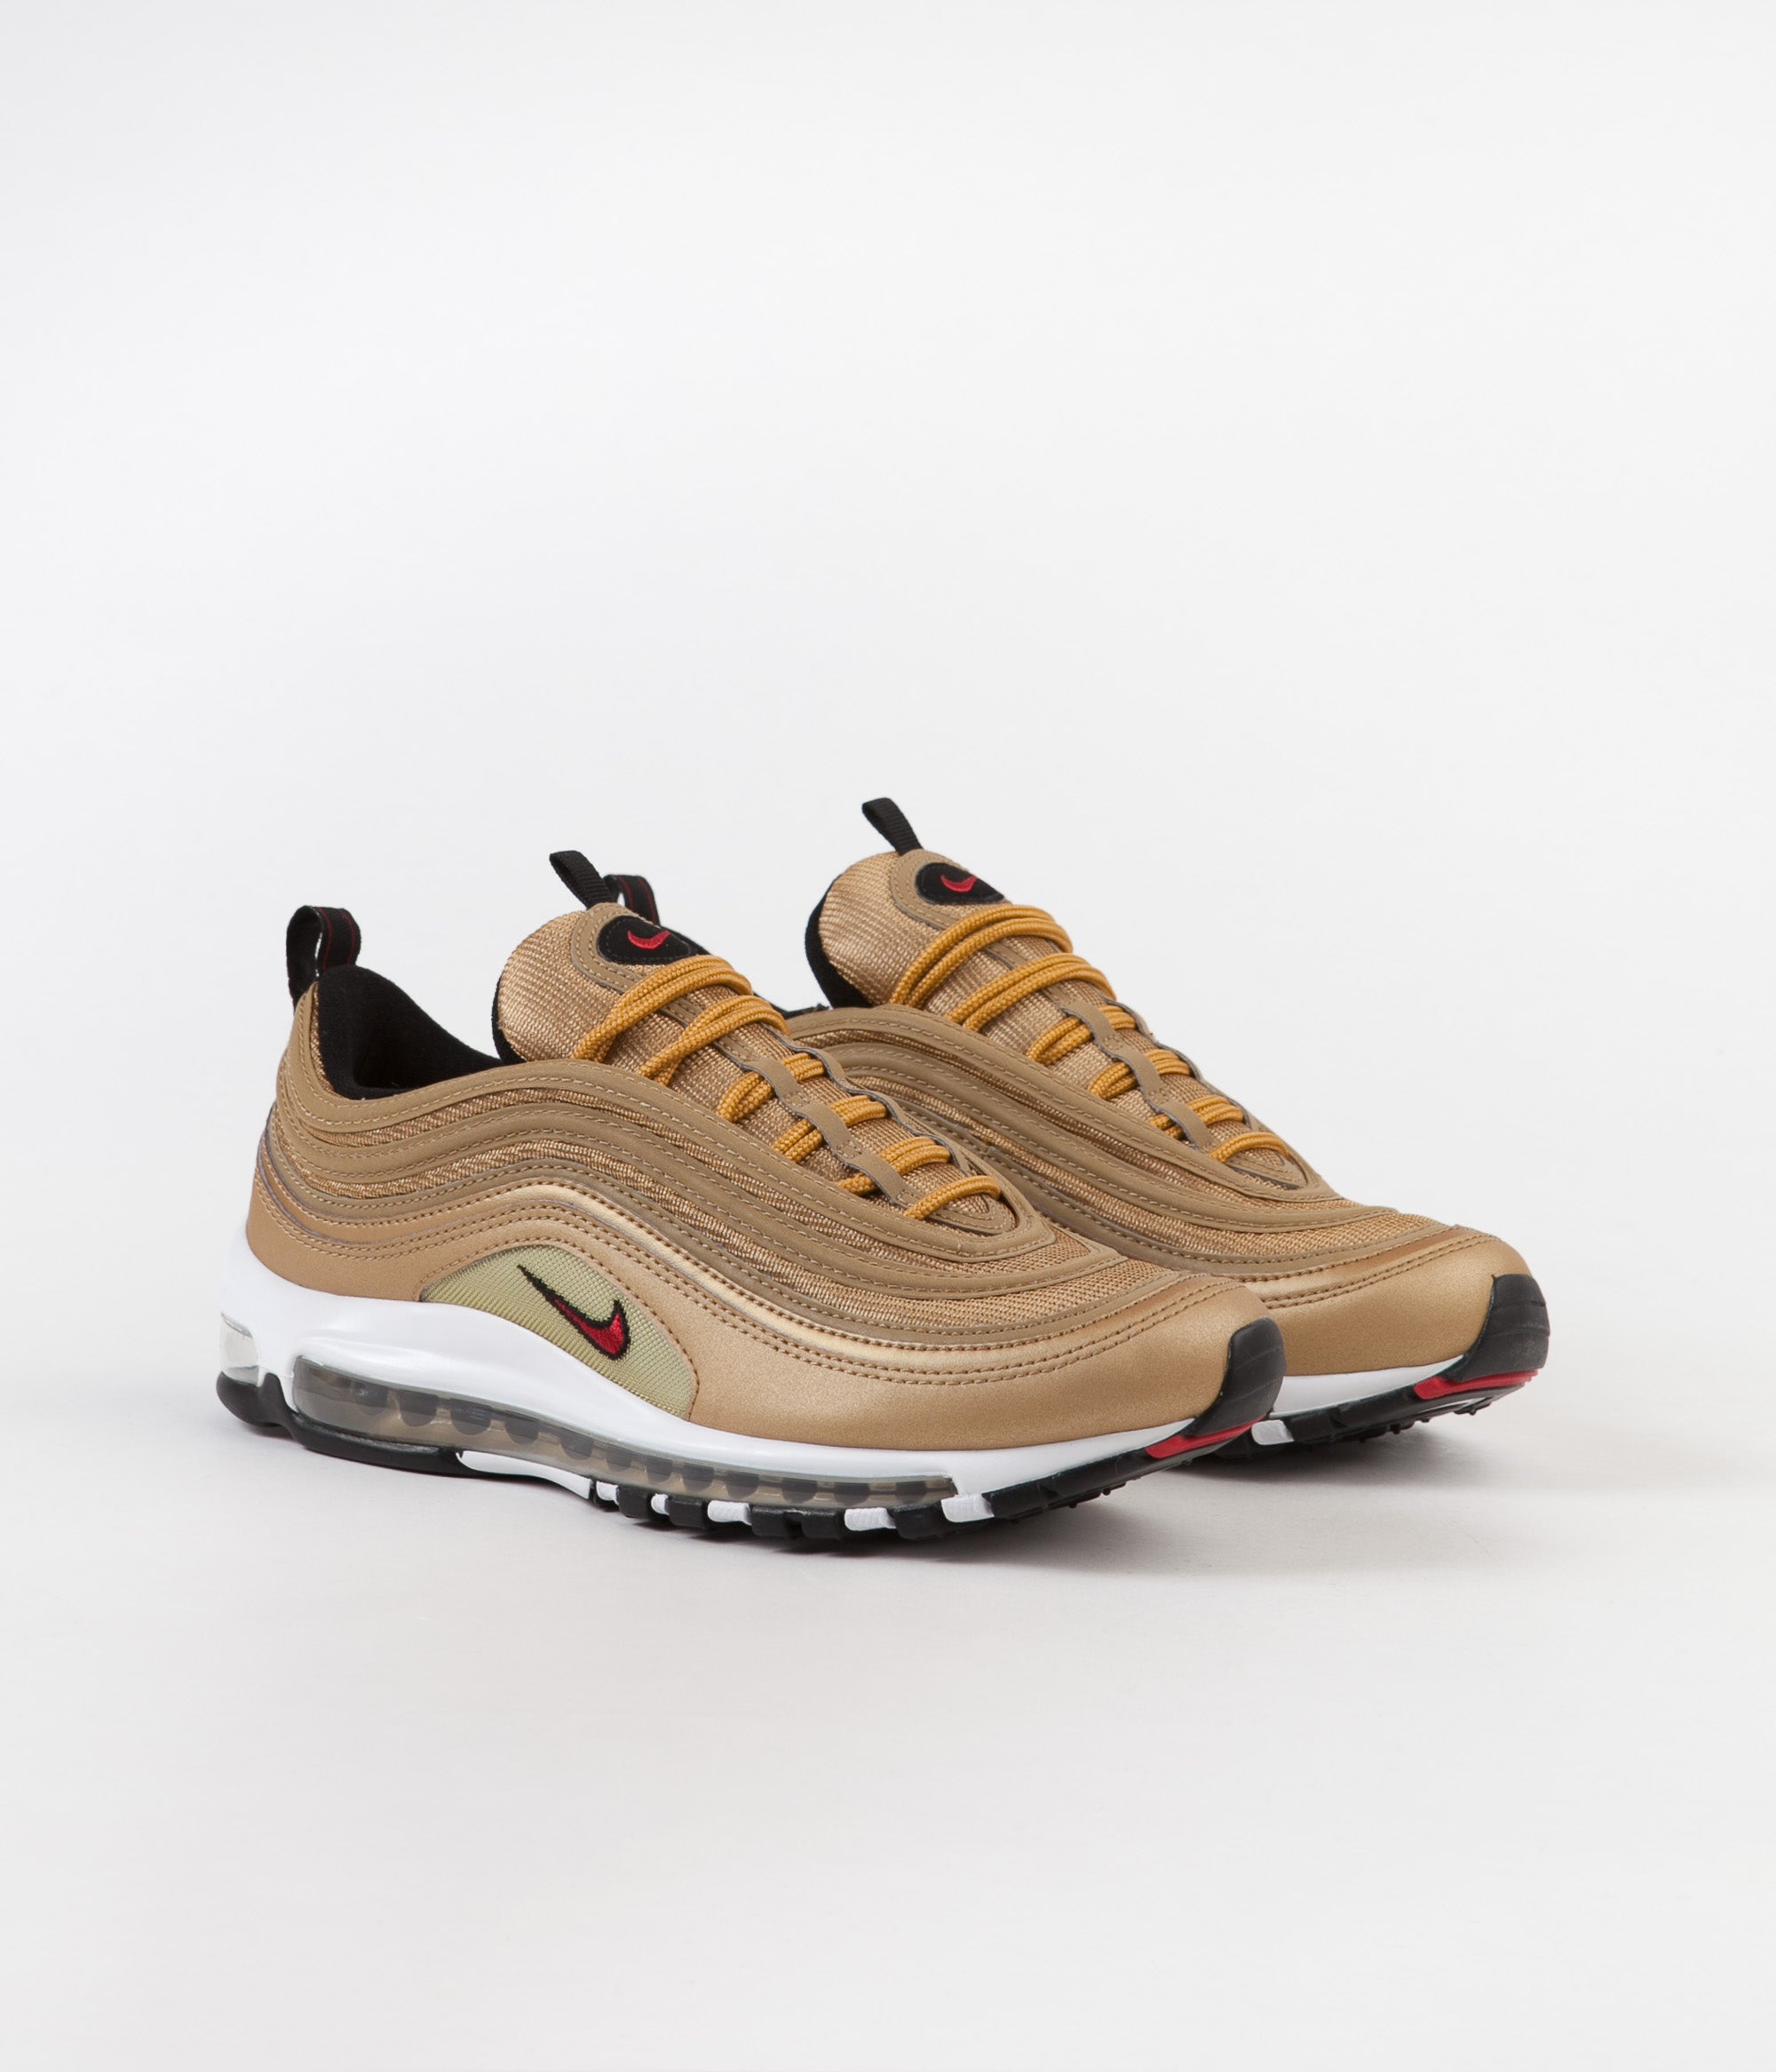 Nike Air Max 97 OG QS men's gold shoes AW LAB